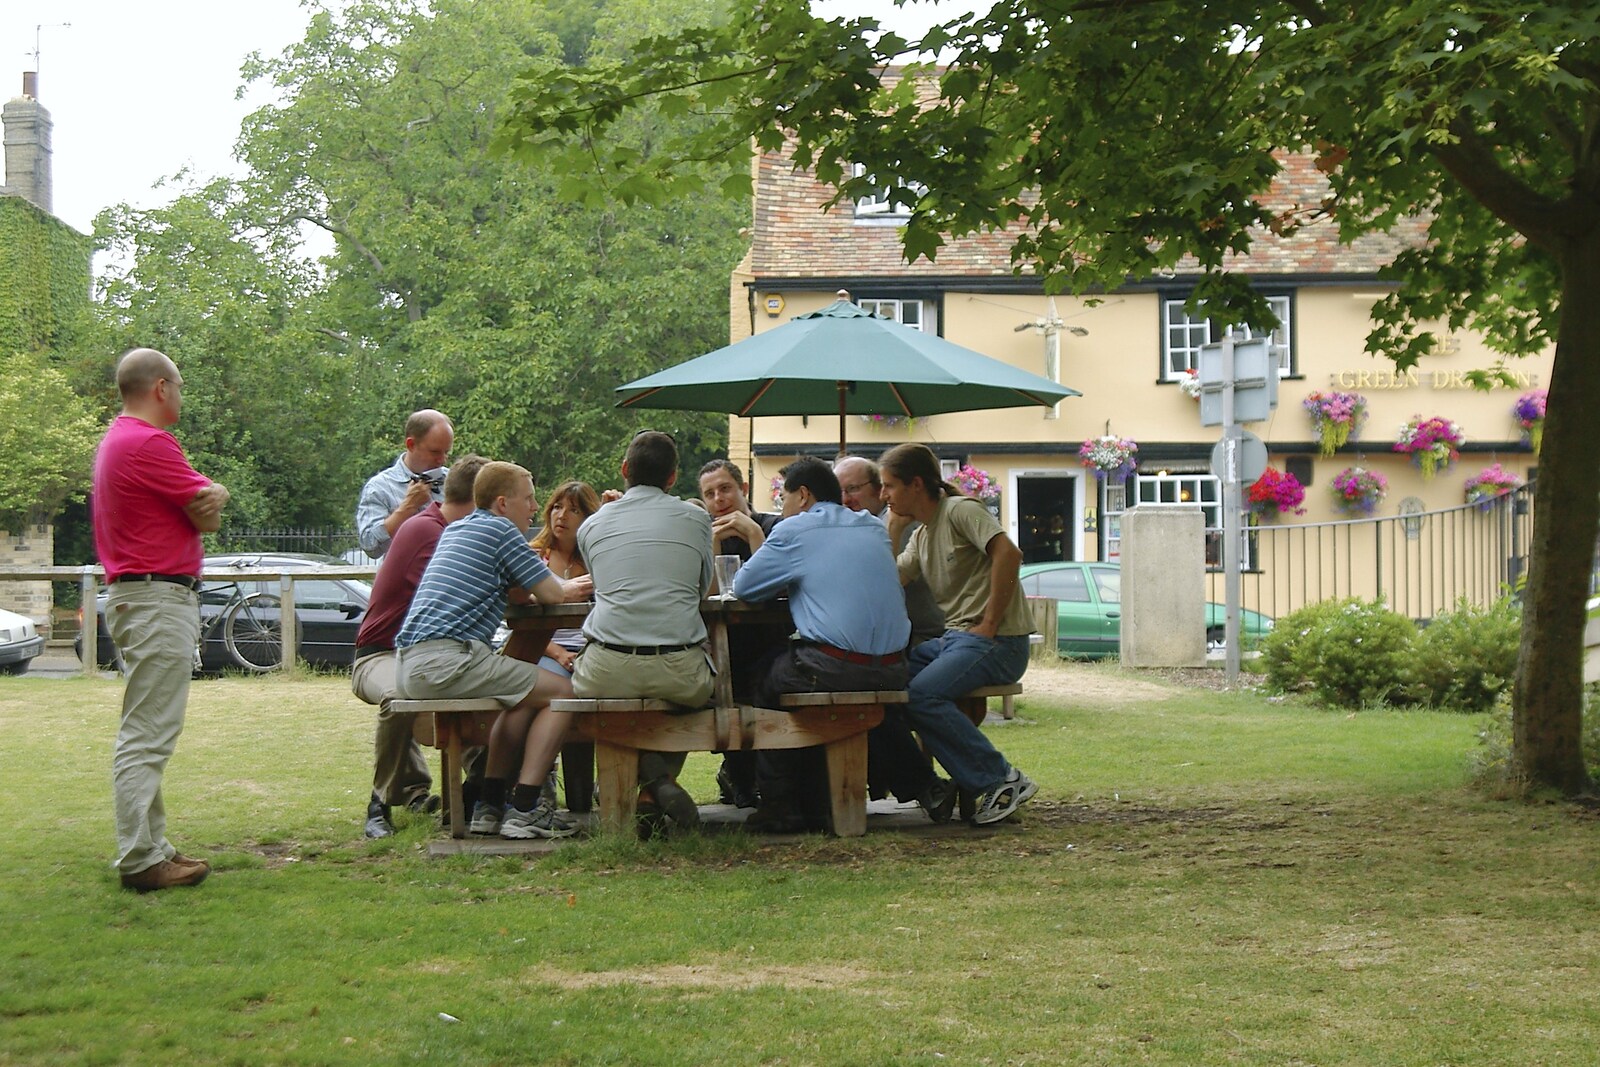 Huddled on a bench at the Green Dragon from Hilary Leaves Qualcomm, The Green Dragon, Water Street, Cambridge - 5th July 2006